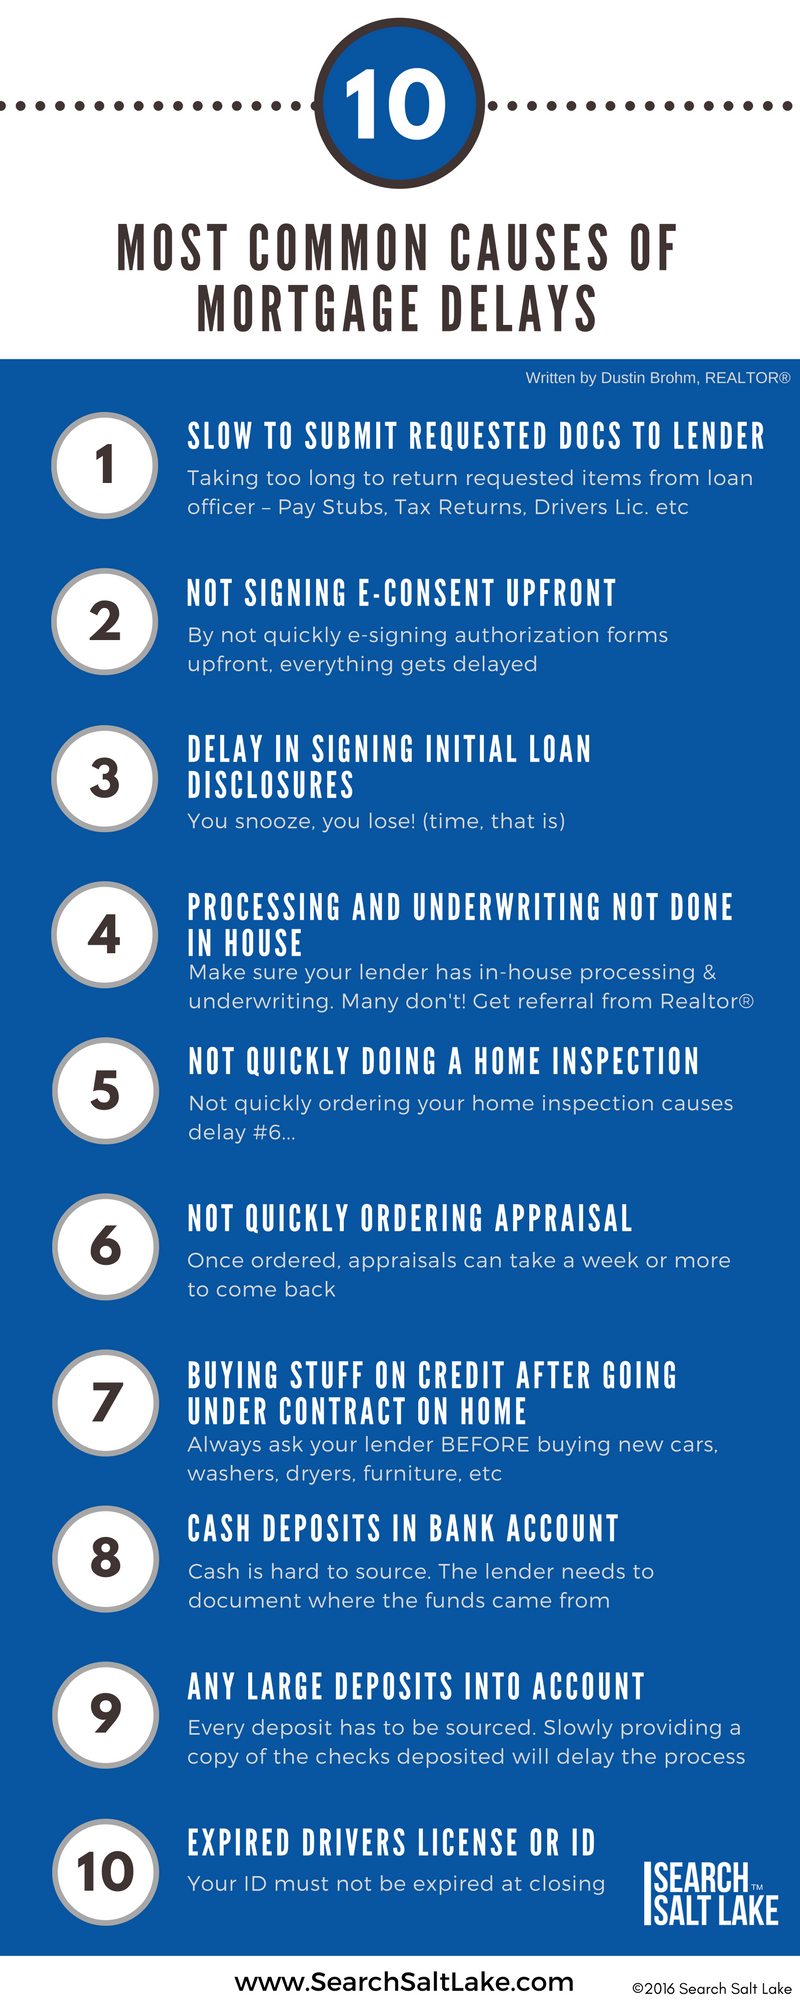 Top 10 Causes of Mortgage Delays